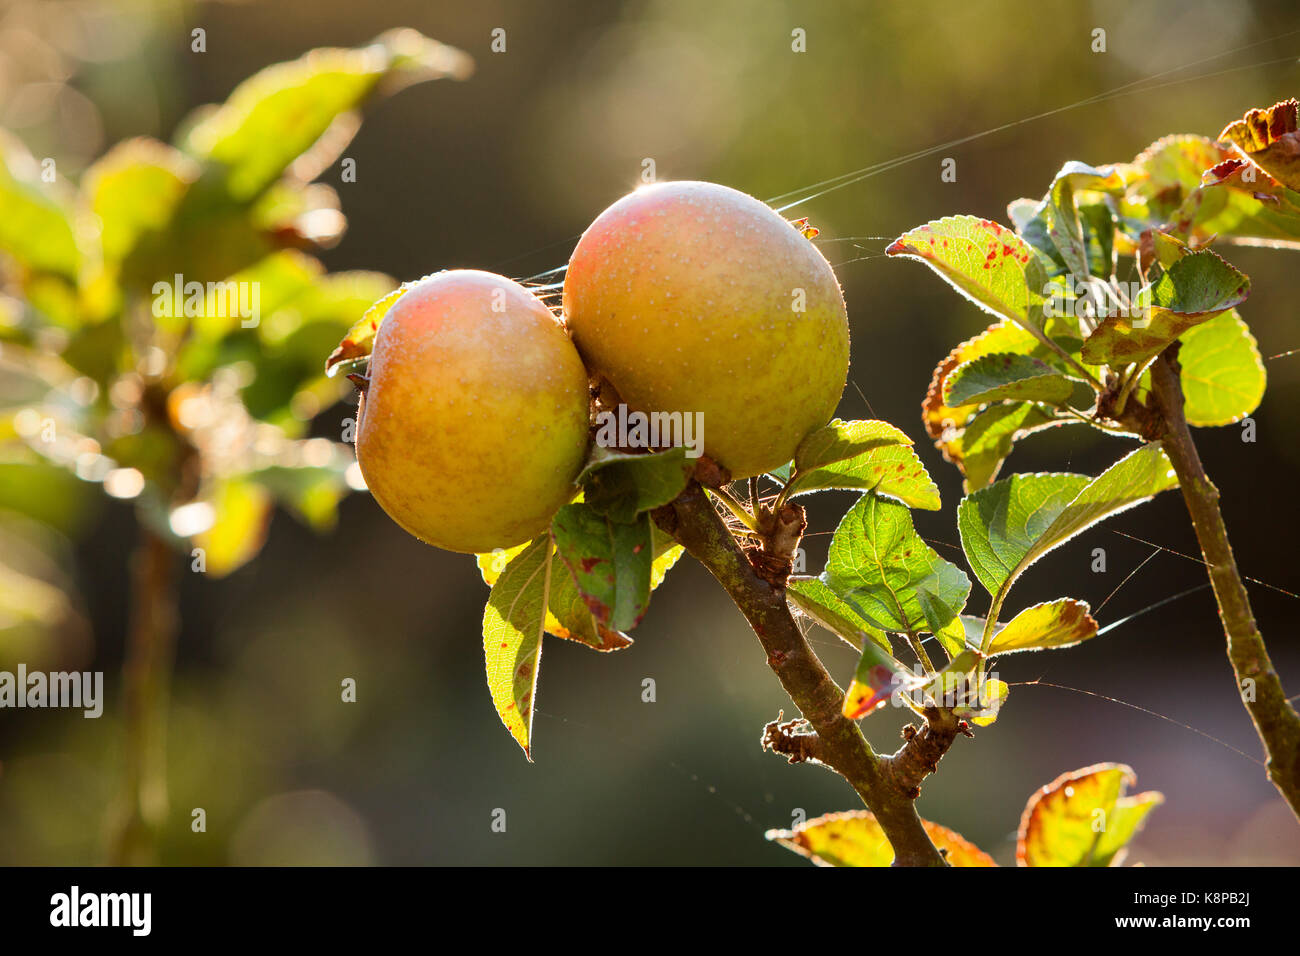 Normanby Hall Country Park, UK. 19th Sep, 2017. UK Weather: Apples on a sunny and still afternoon in the Walled Kitchen Garden at Normanby Hall Country Park. Normanby, Scunthorpe, North Lincolnshire, UK. 19th September 2017. Credit: LEE BEEL/Alamy Live News Stock Photo